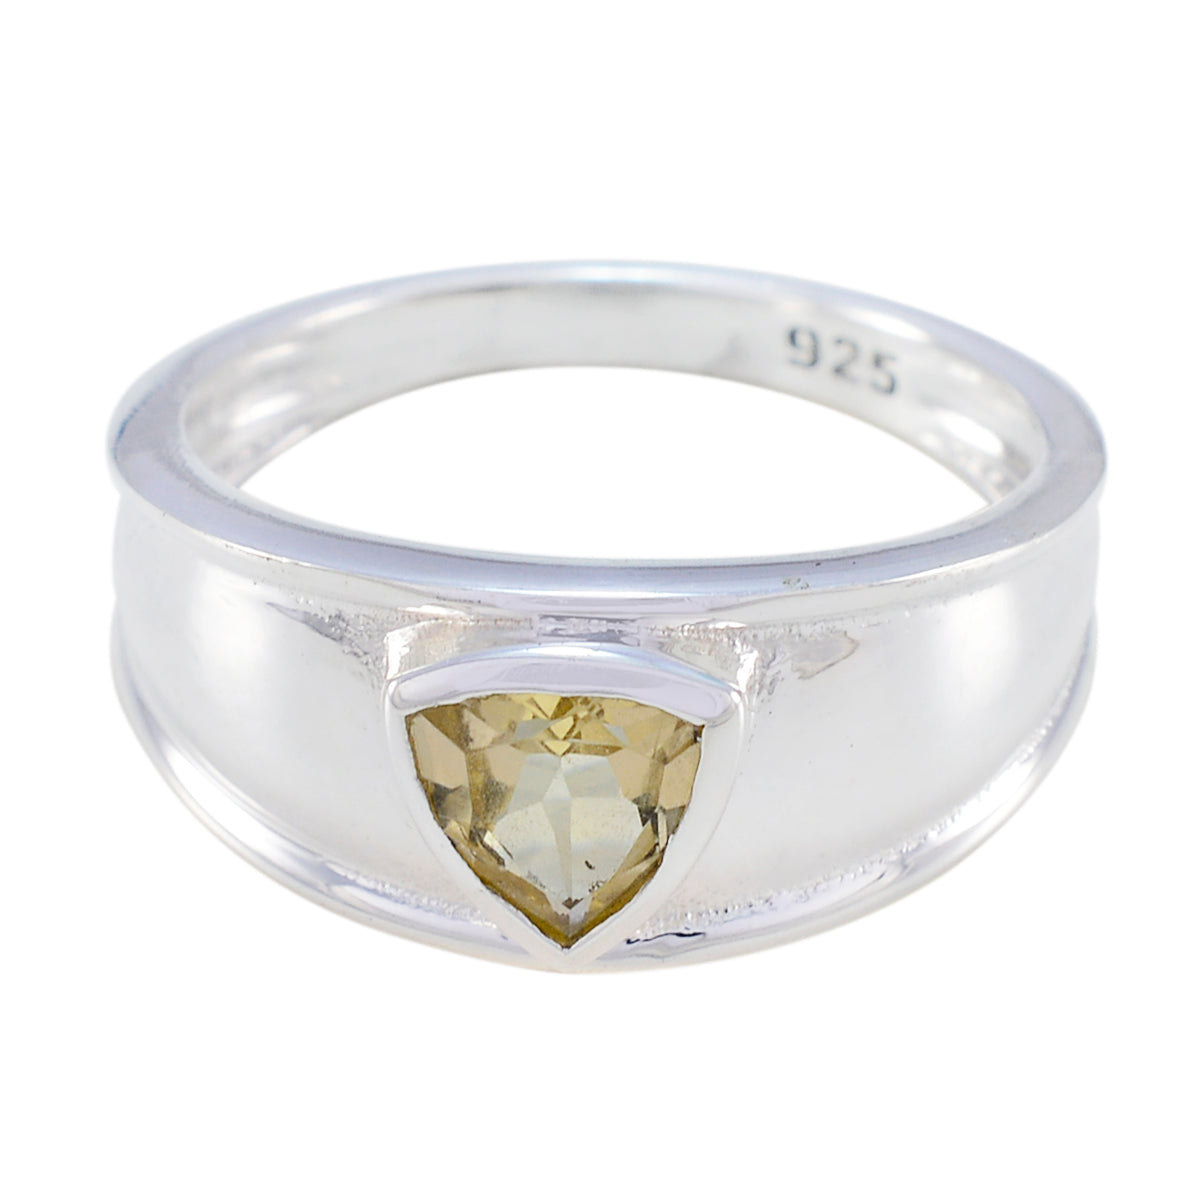 Magnificent Gem Citrine Sterling Silver Rings Wholesale Body Jewelry